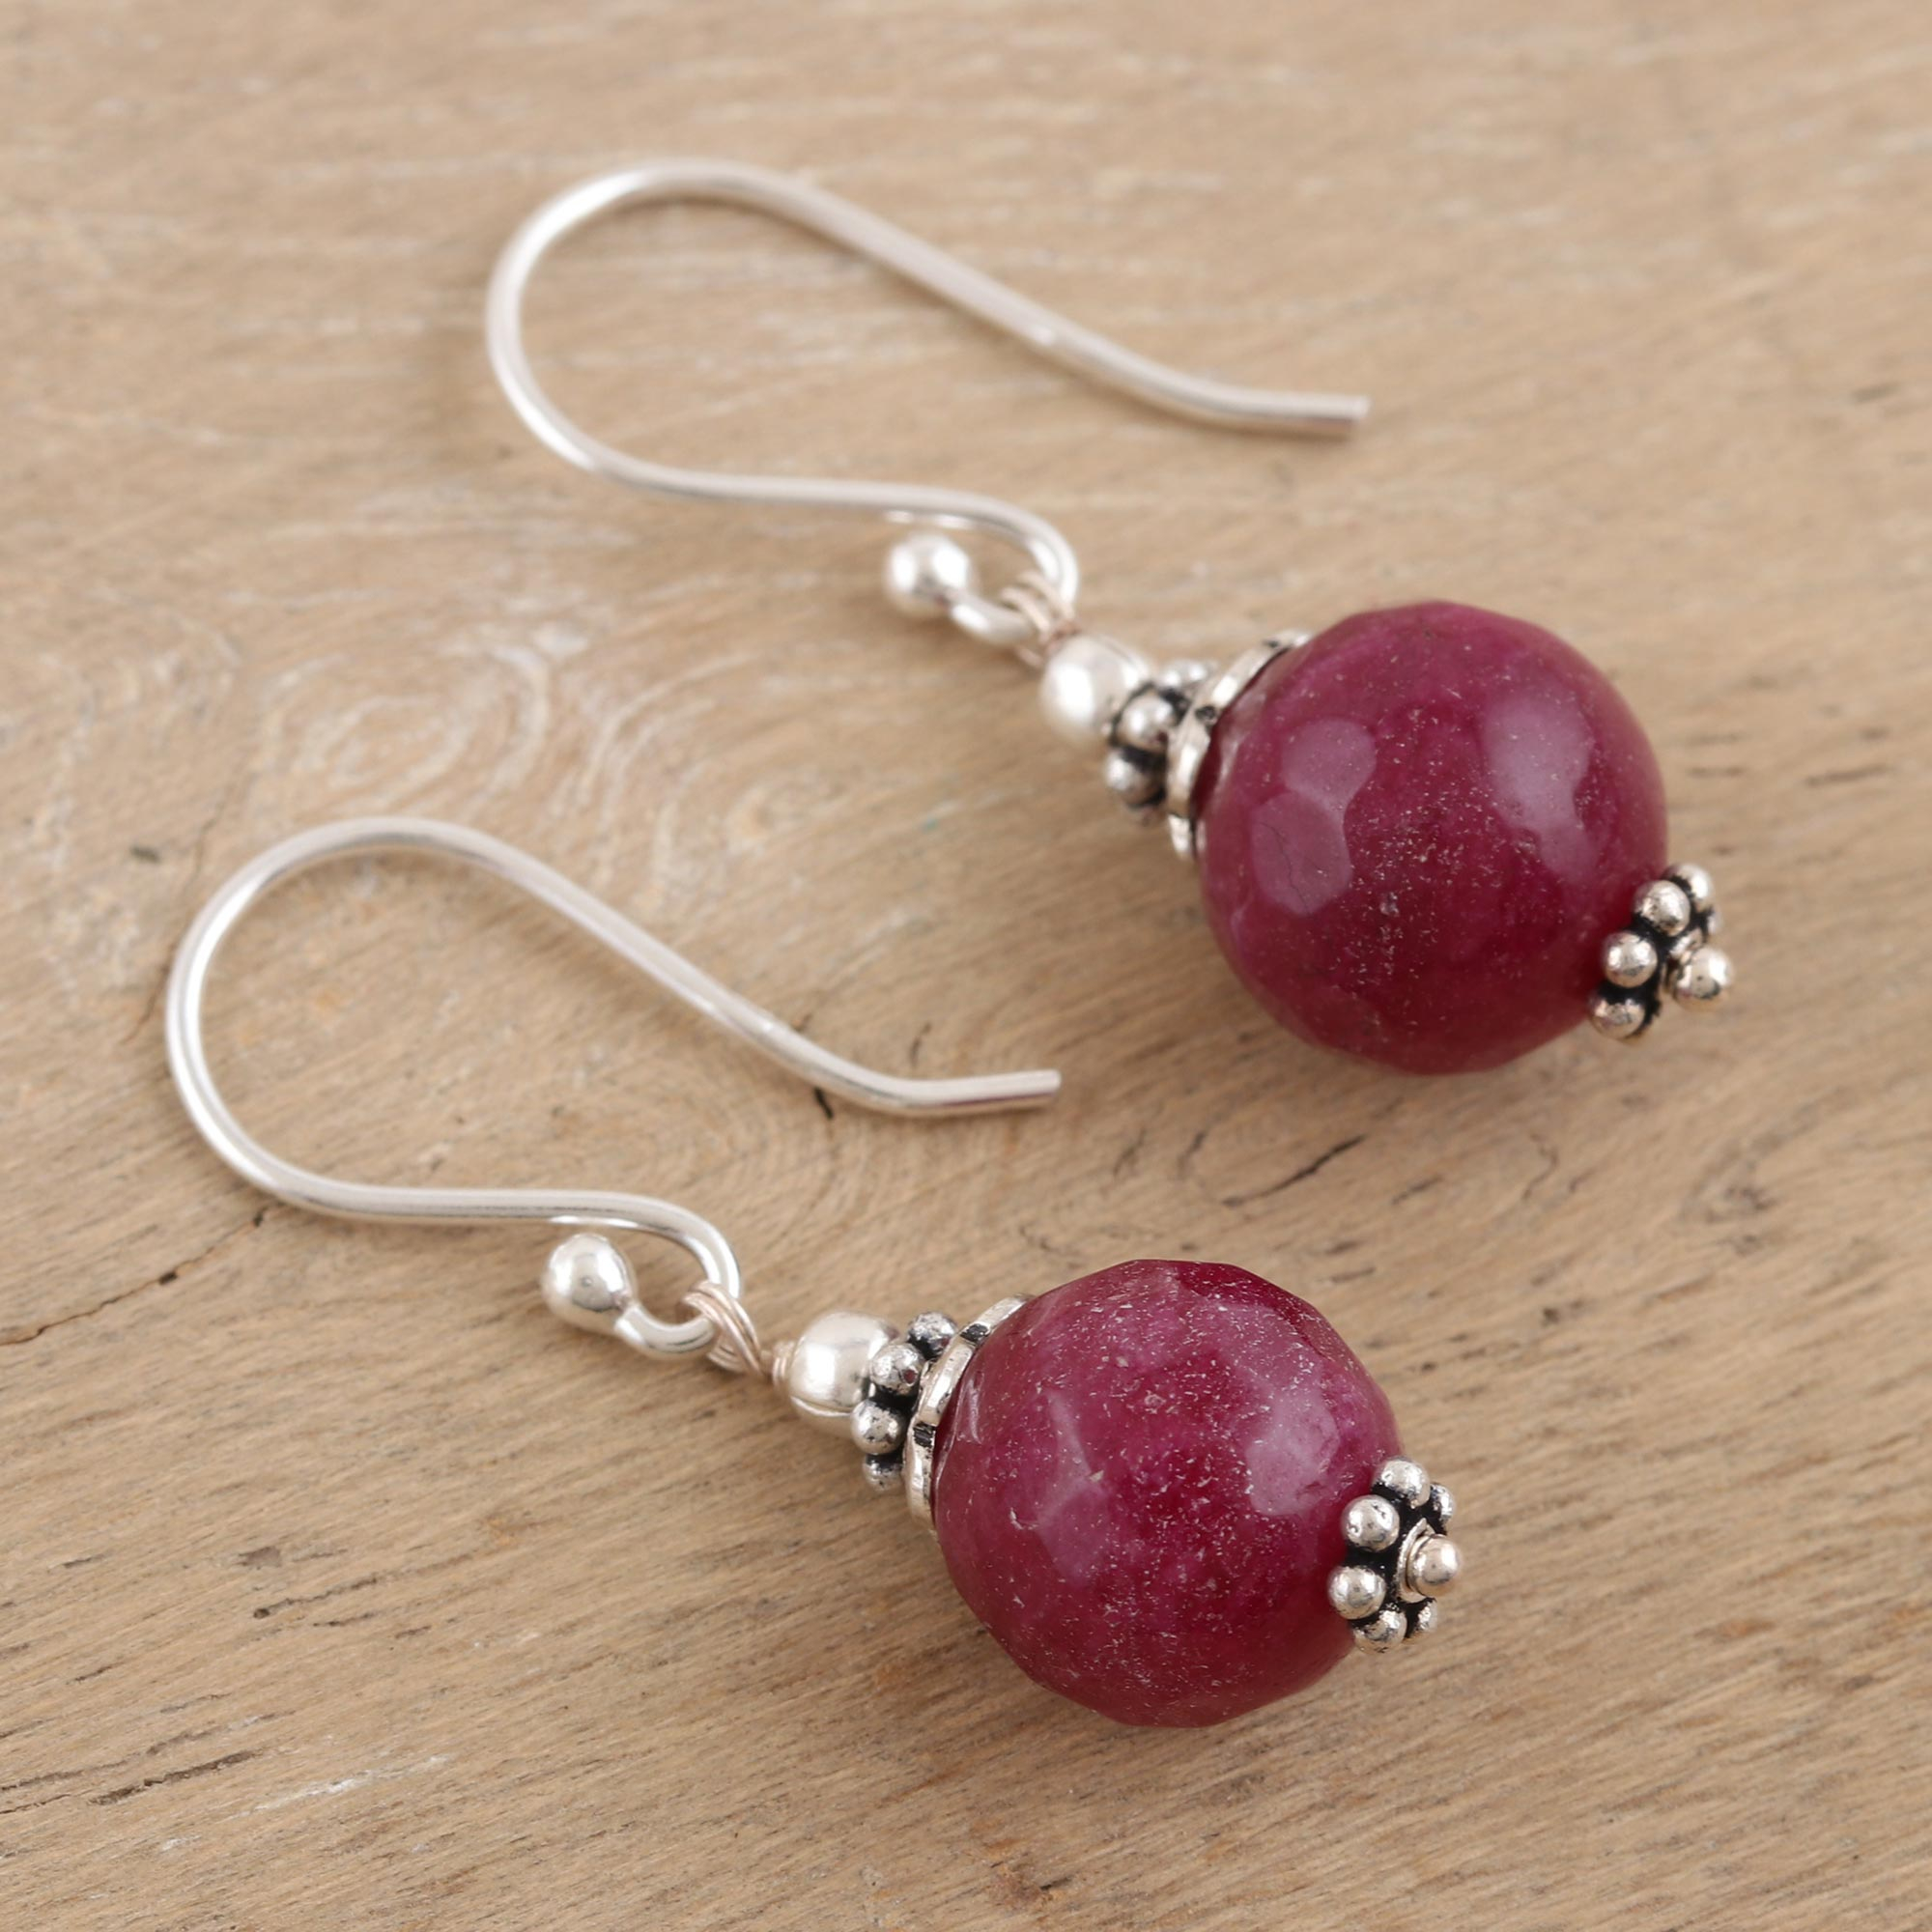 Red Agate Artisan Crafted Sterling Silver Earrings - Glorious Red | NOVICA